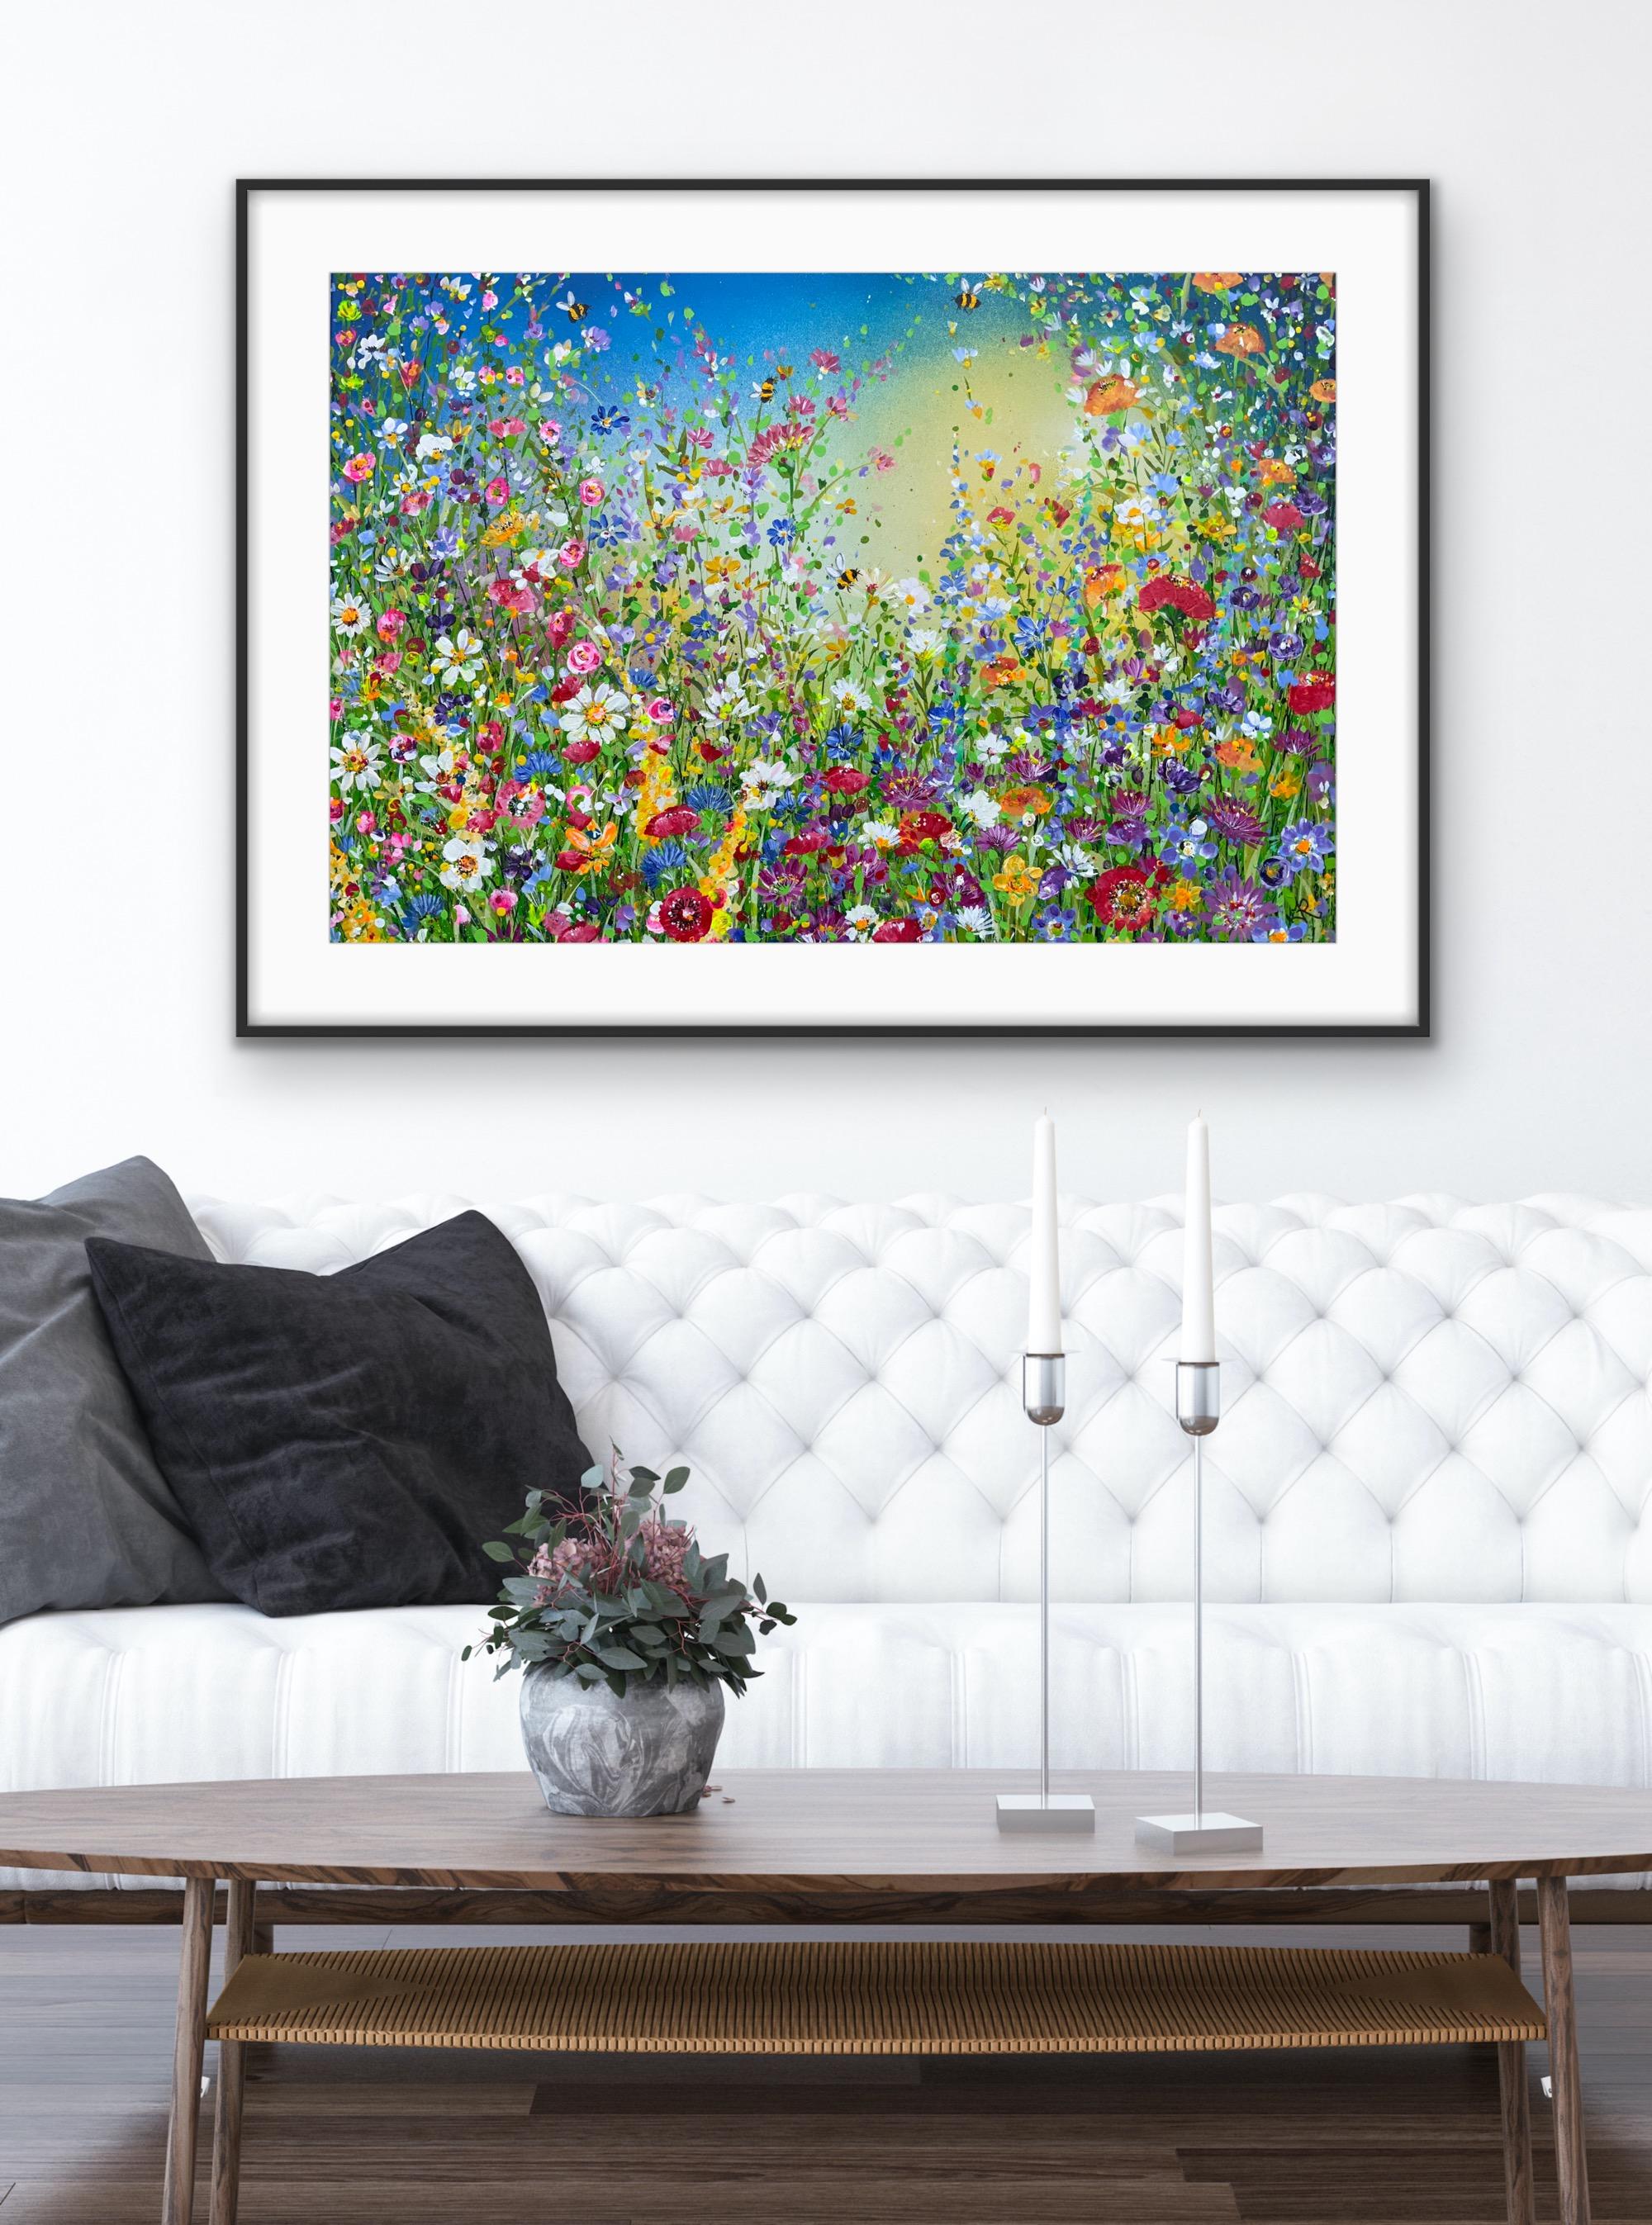 Joy of Summer Floral Mead, Original painting, Floral, Meadow, Landscape painting - Contemporary Painting by Jan Rogers